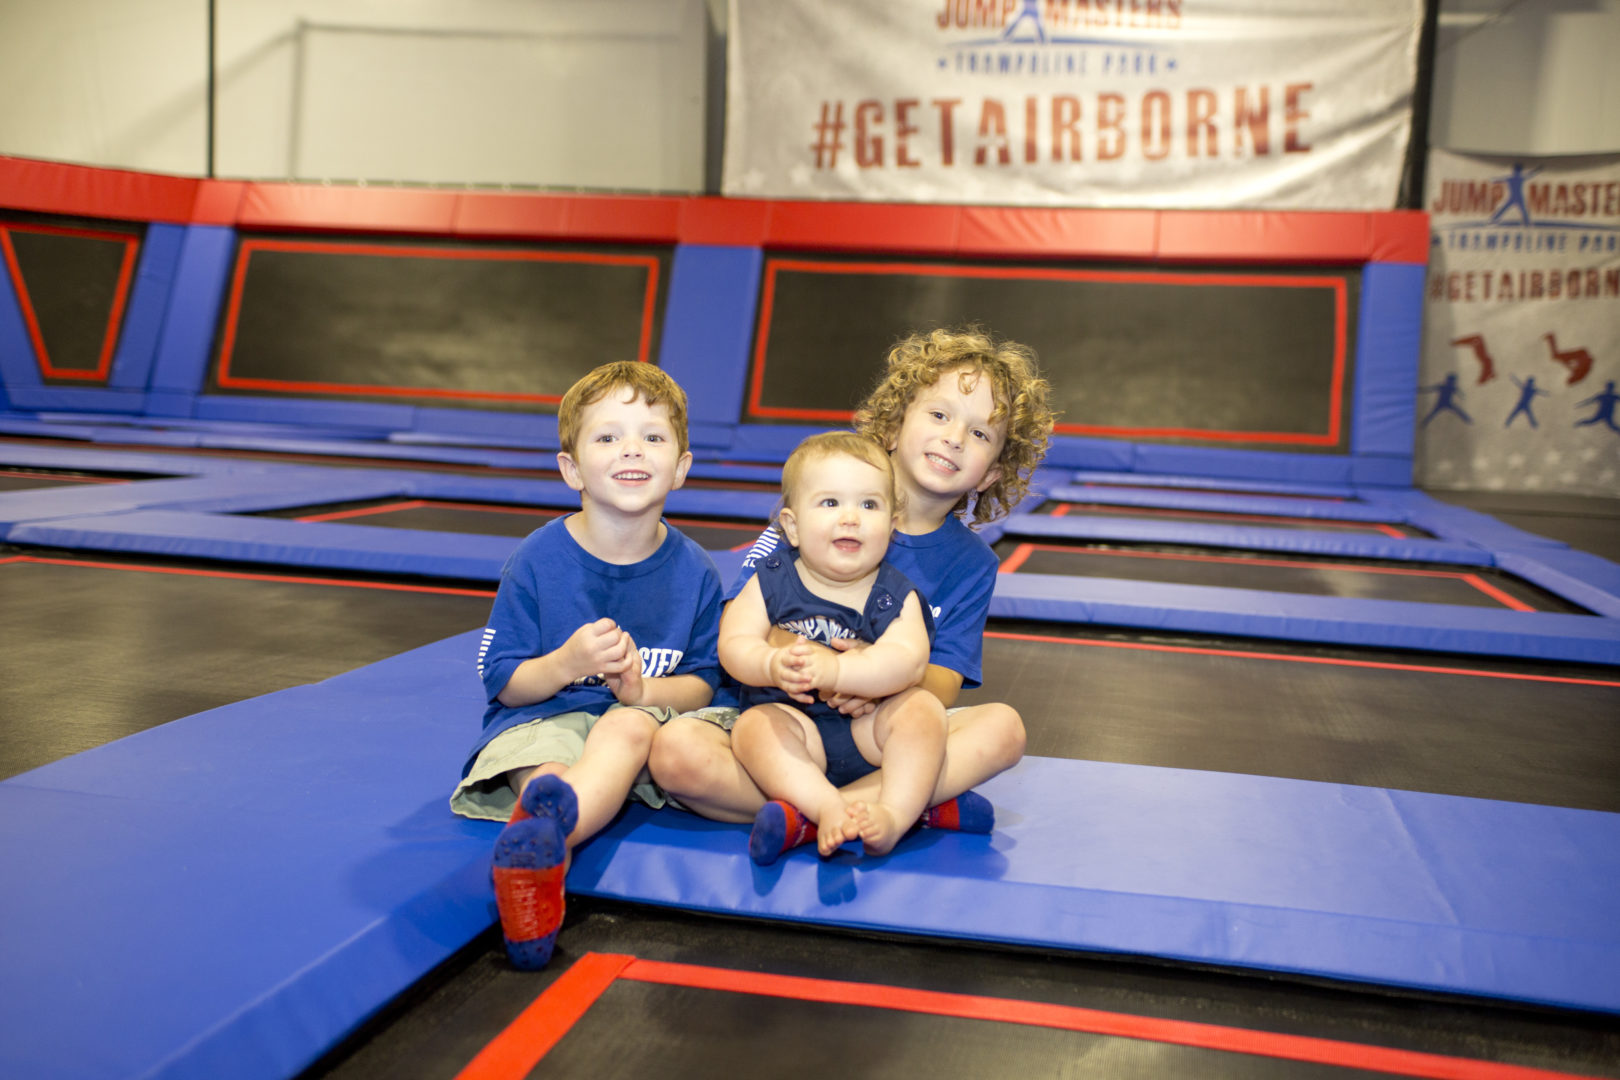 Activiites for smilling children - trampoline park at Jumpmasters in Manteo NC